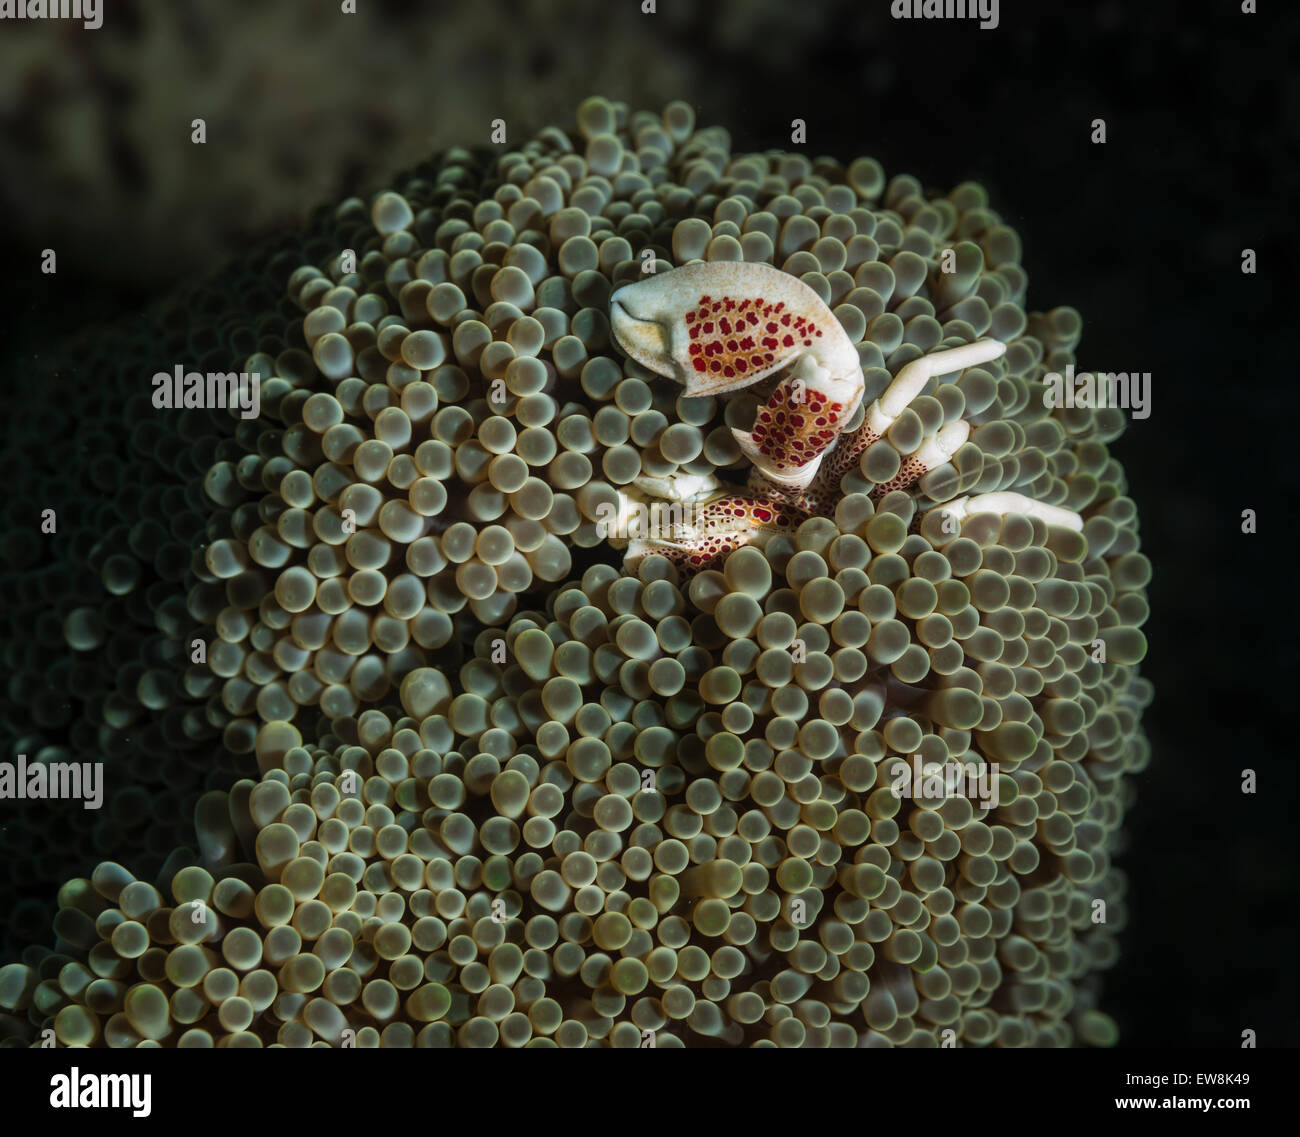 Porcelain crab hiding in an anemone Stock Photo